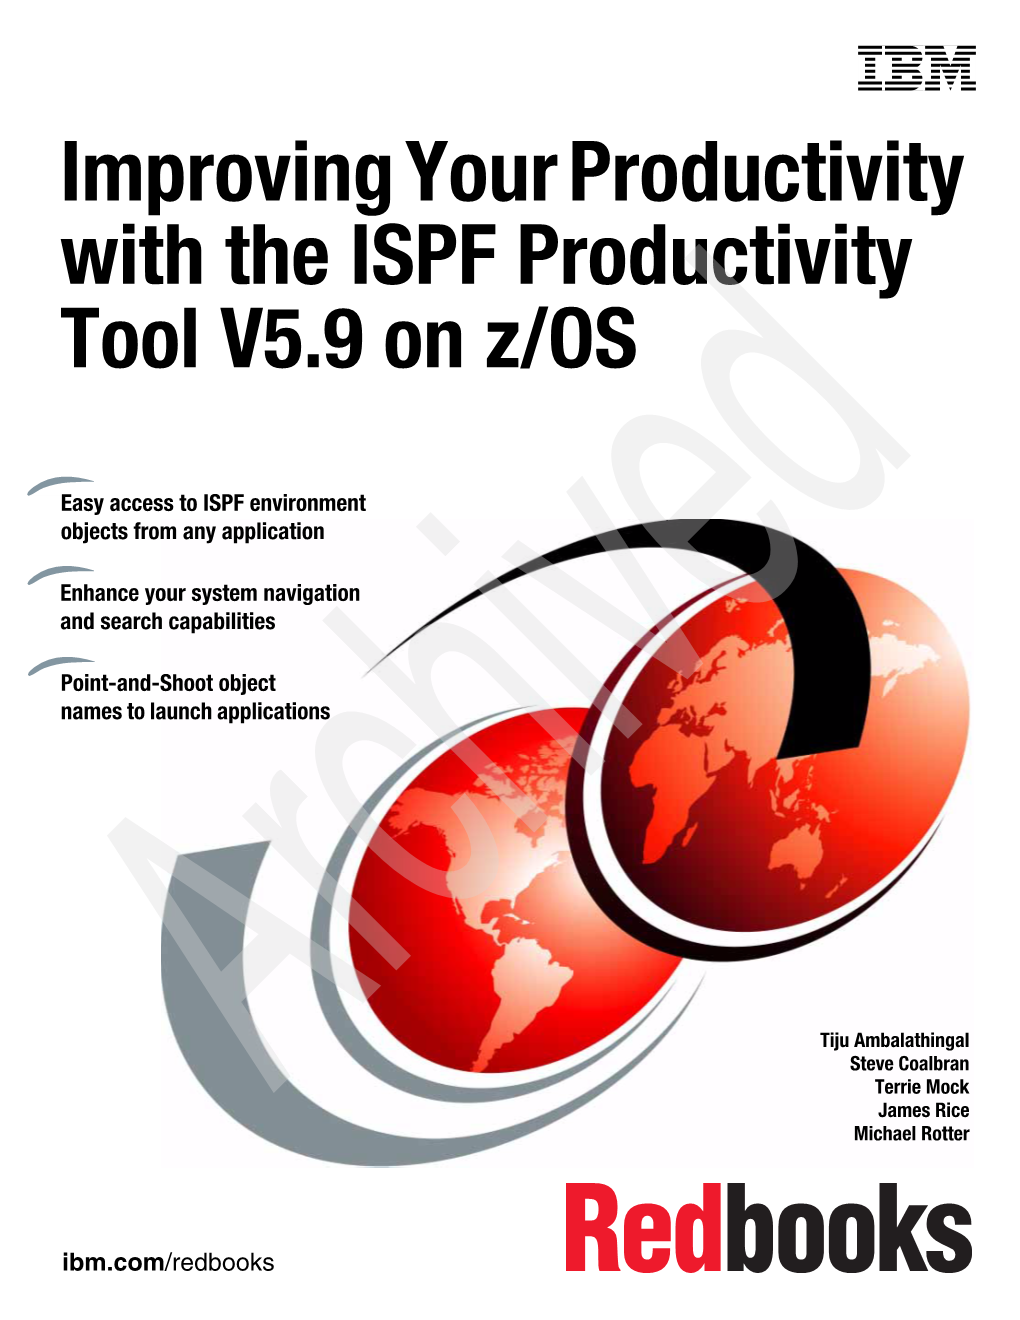 Introduction to the ISPF Productivity Tool V5.9